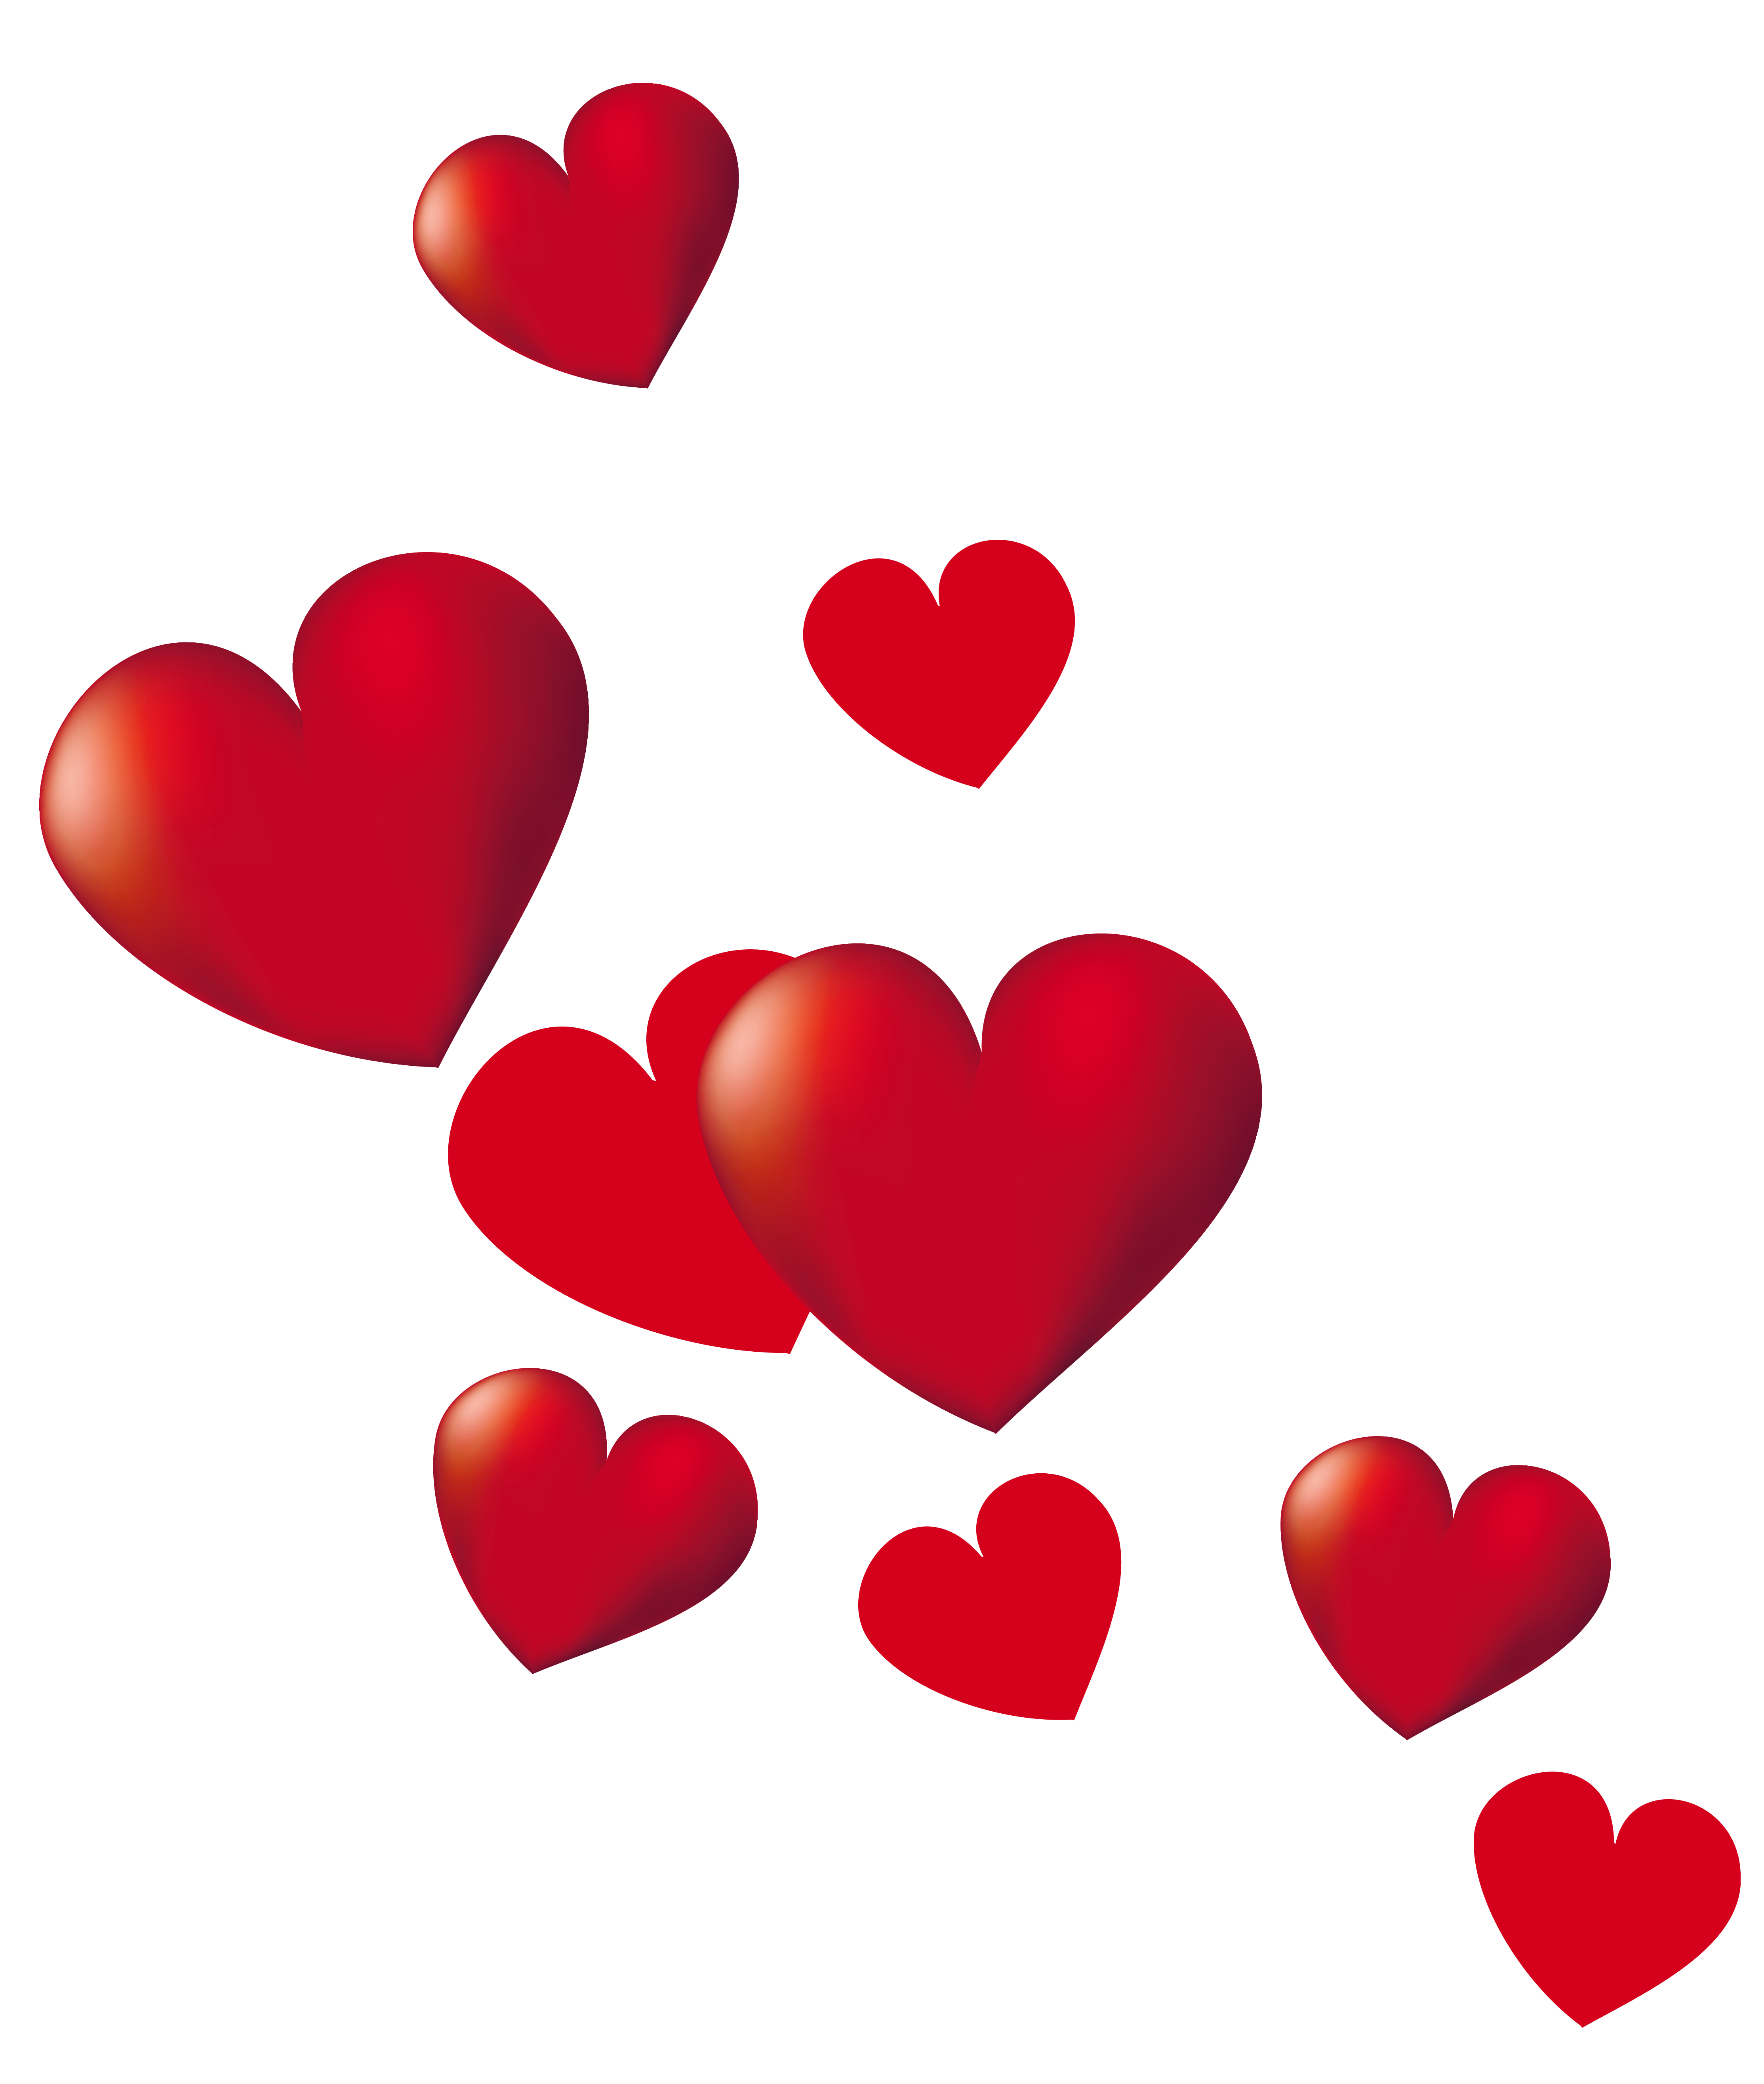 Free Hearts Png Download Free Hearts Png Png Images Free Cliparts On Clipart Library